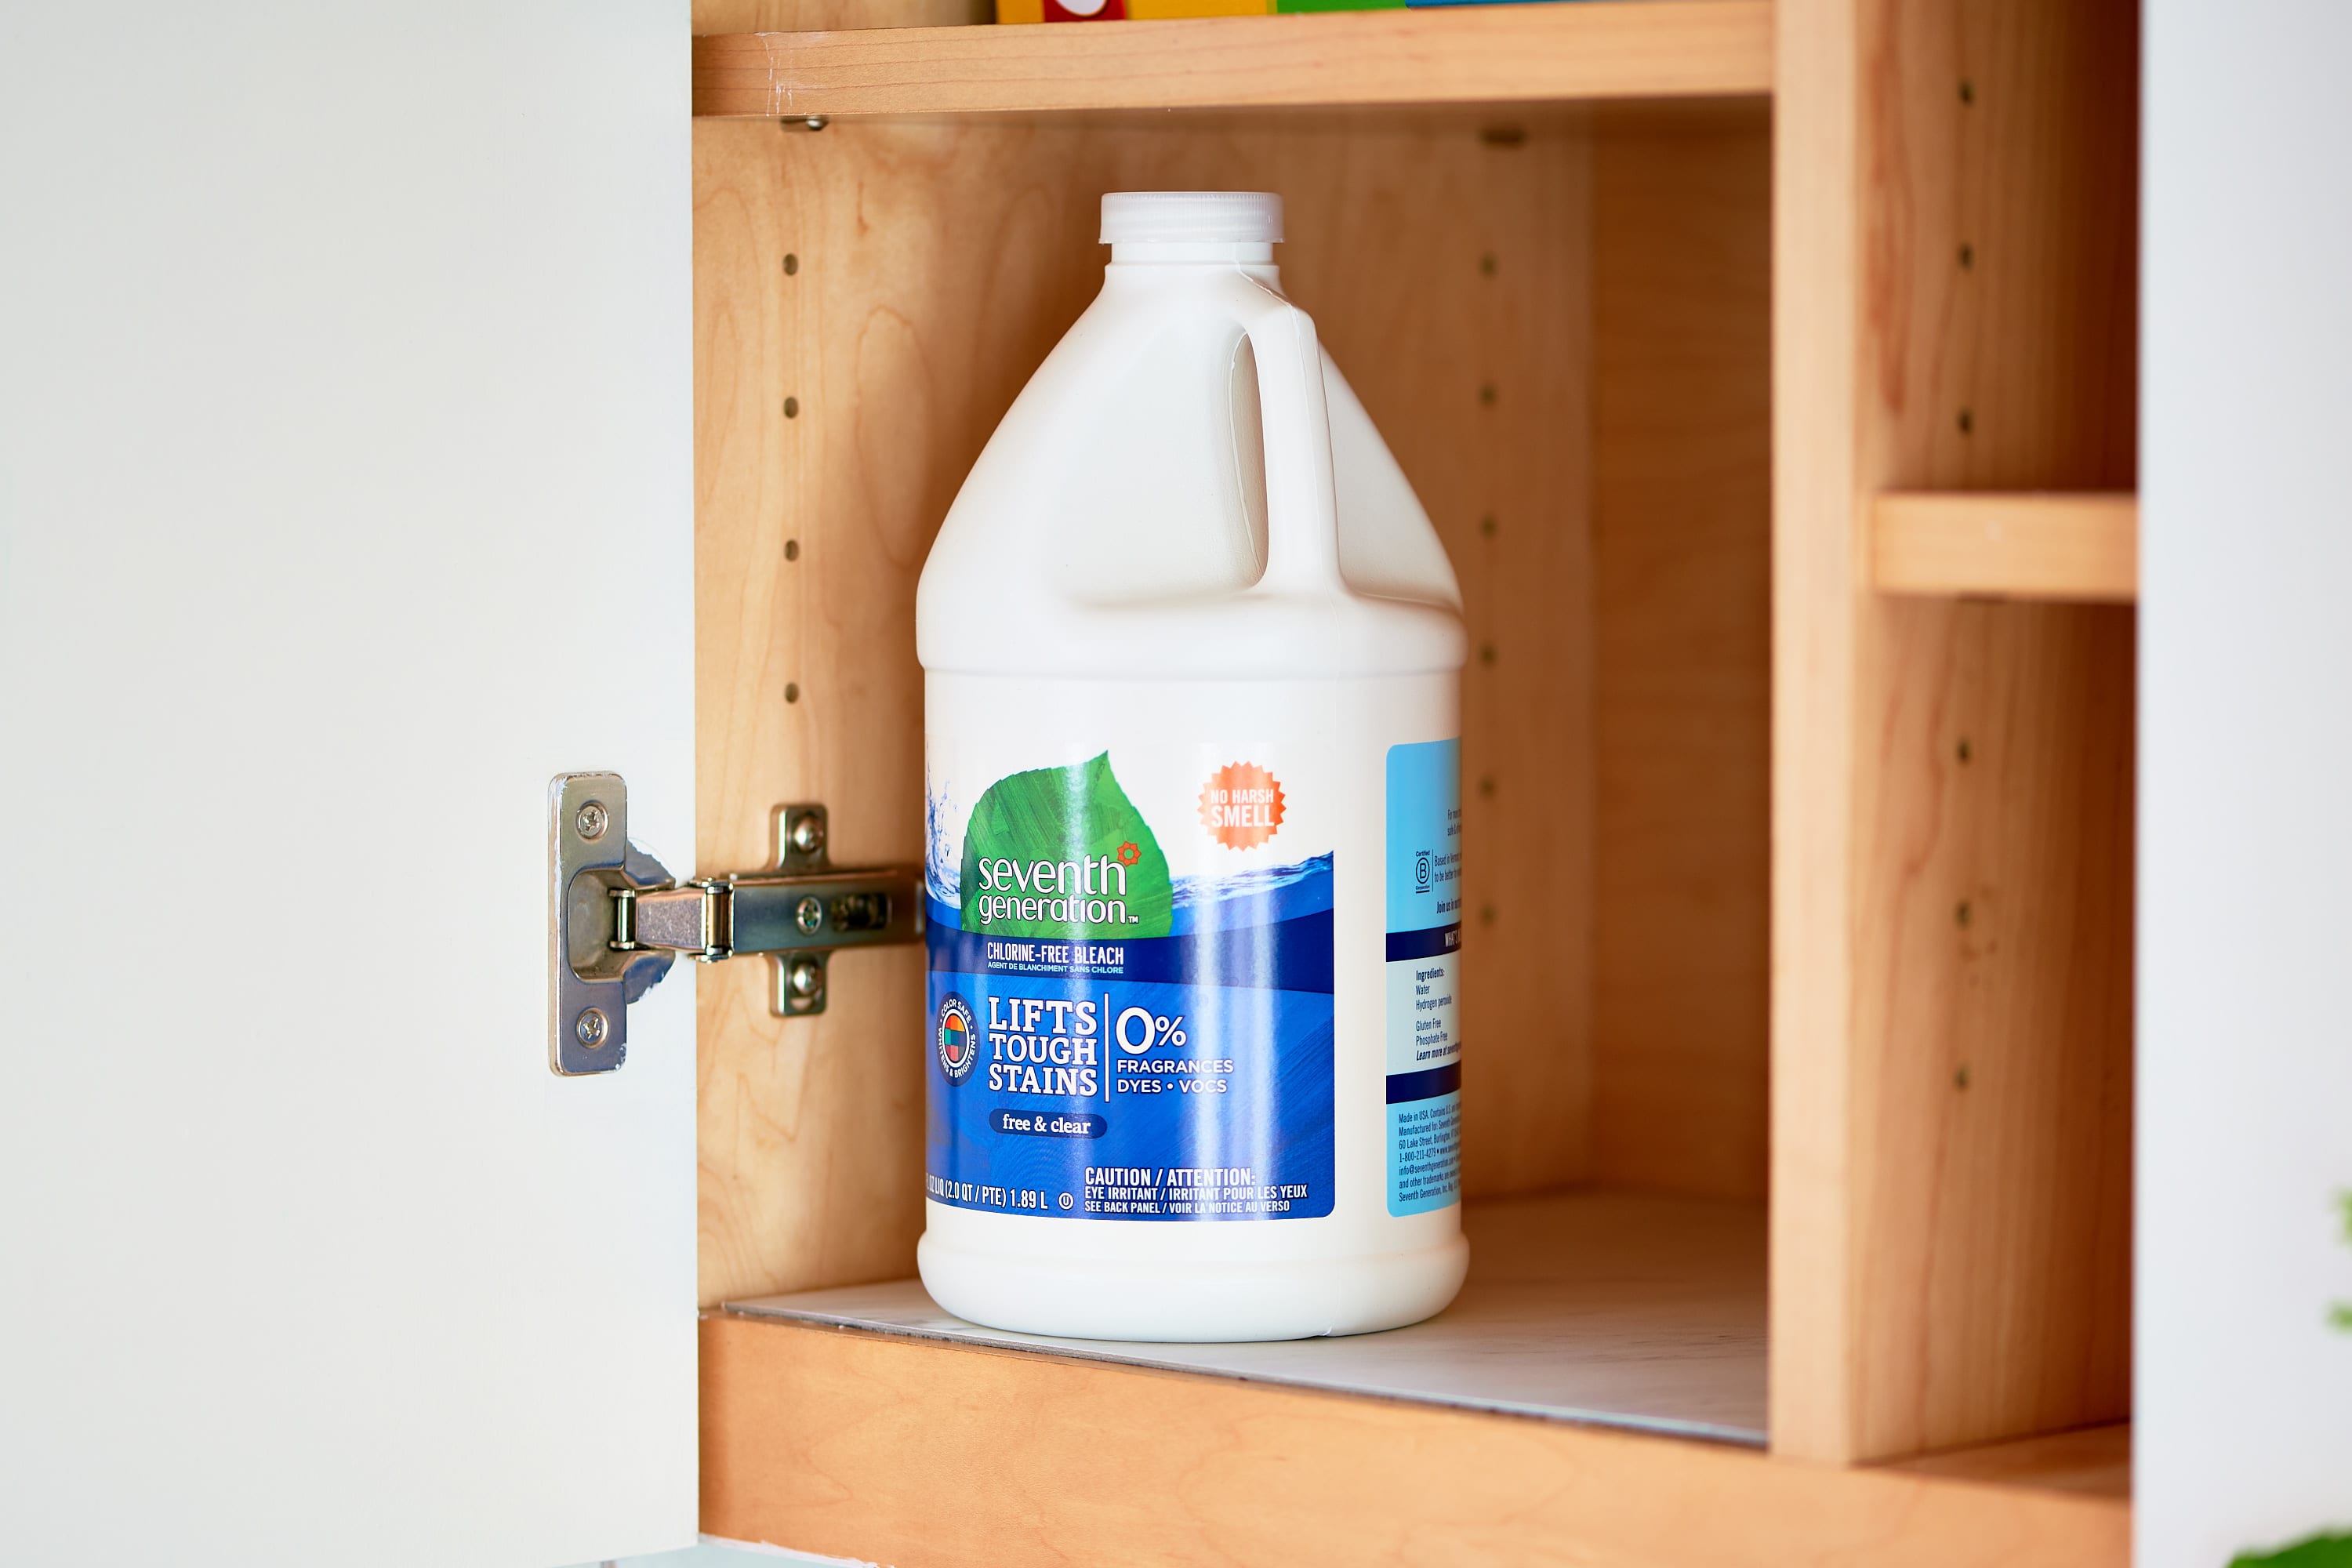 What You Should (and Shouldn't) Store Under the Kitchen Sink